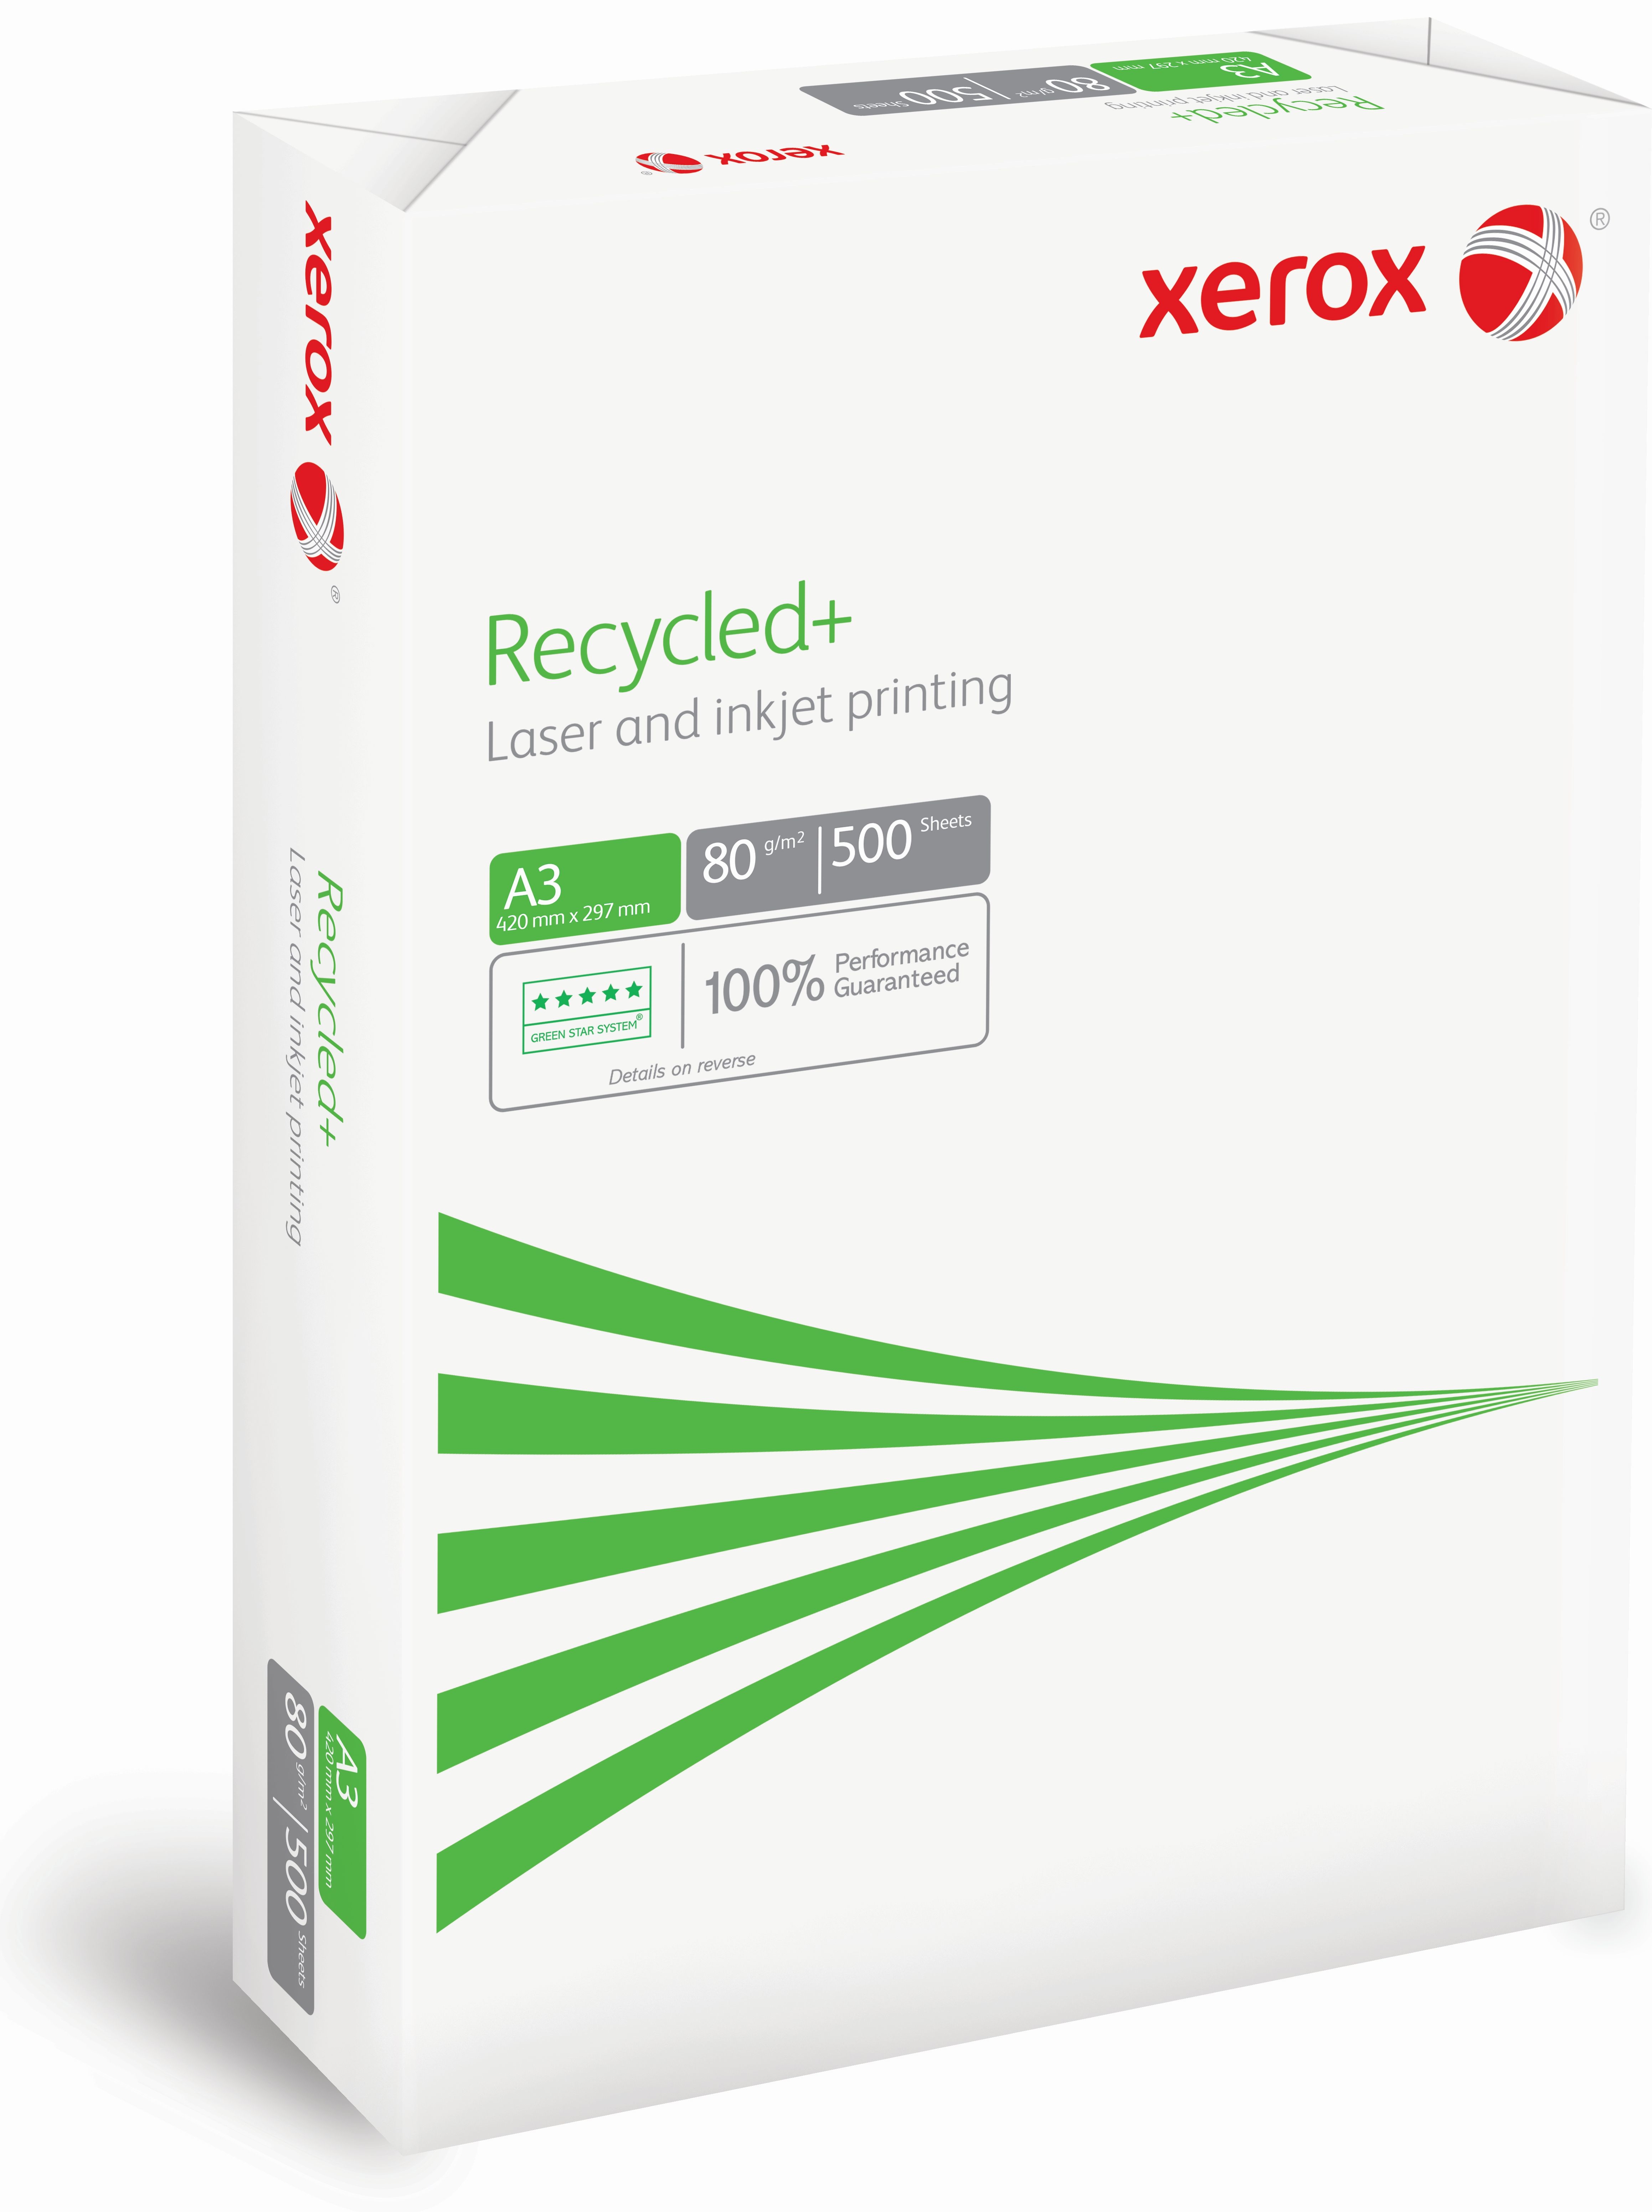 XEROX Copying Paper Recycled+ A3 499672 80g blanc CIE85 500 feuilles